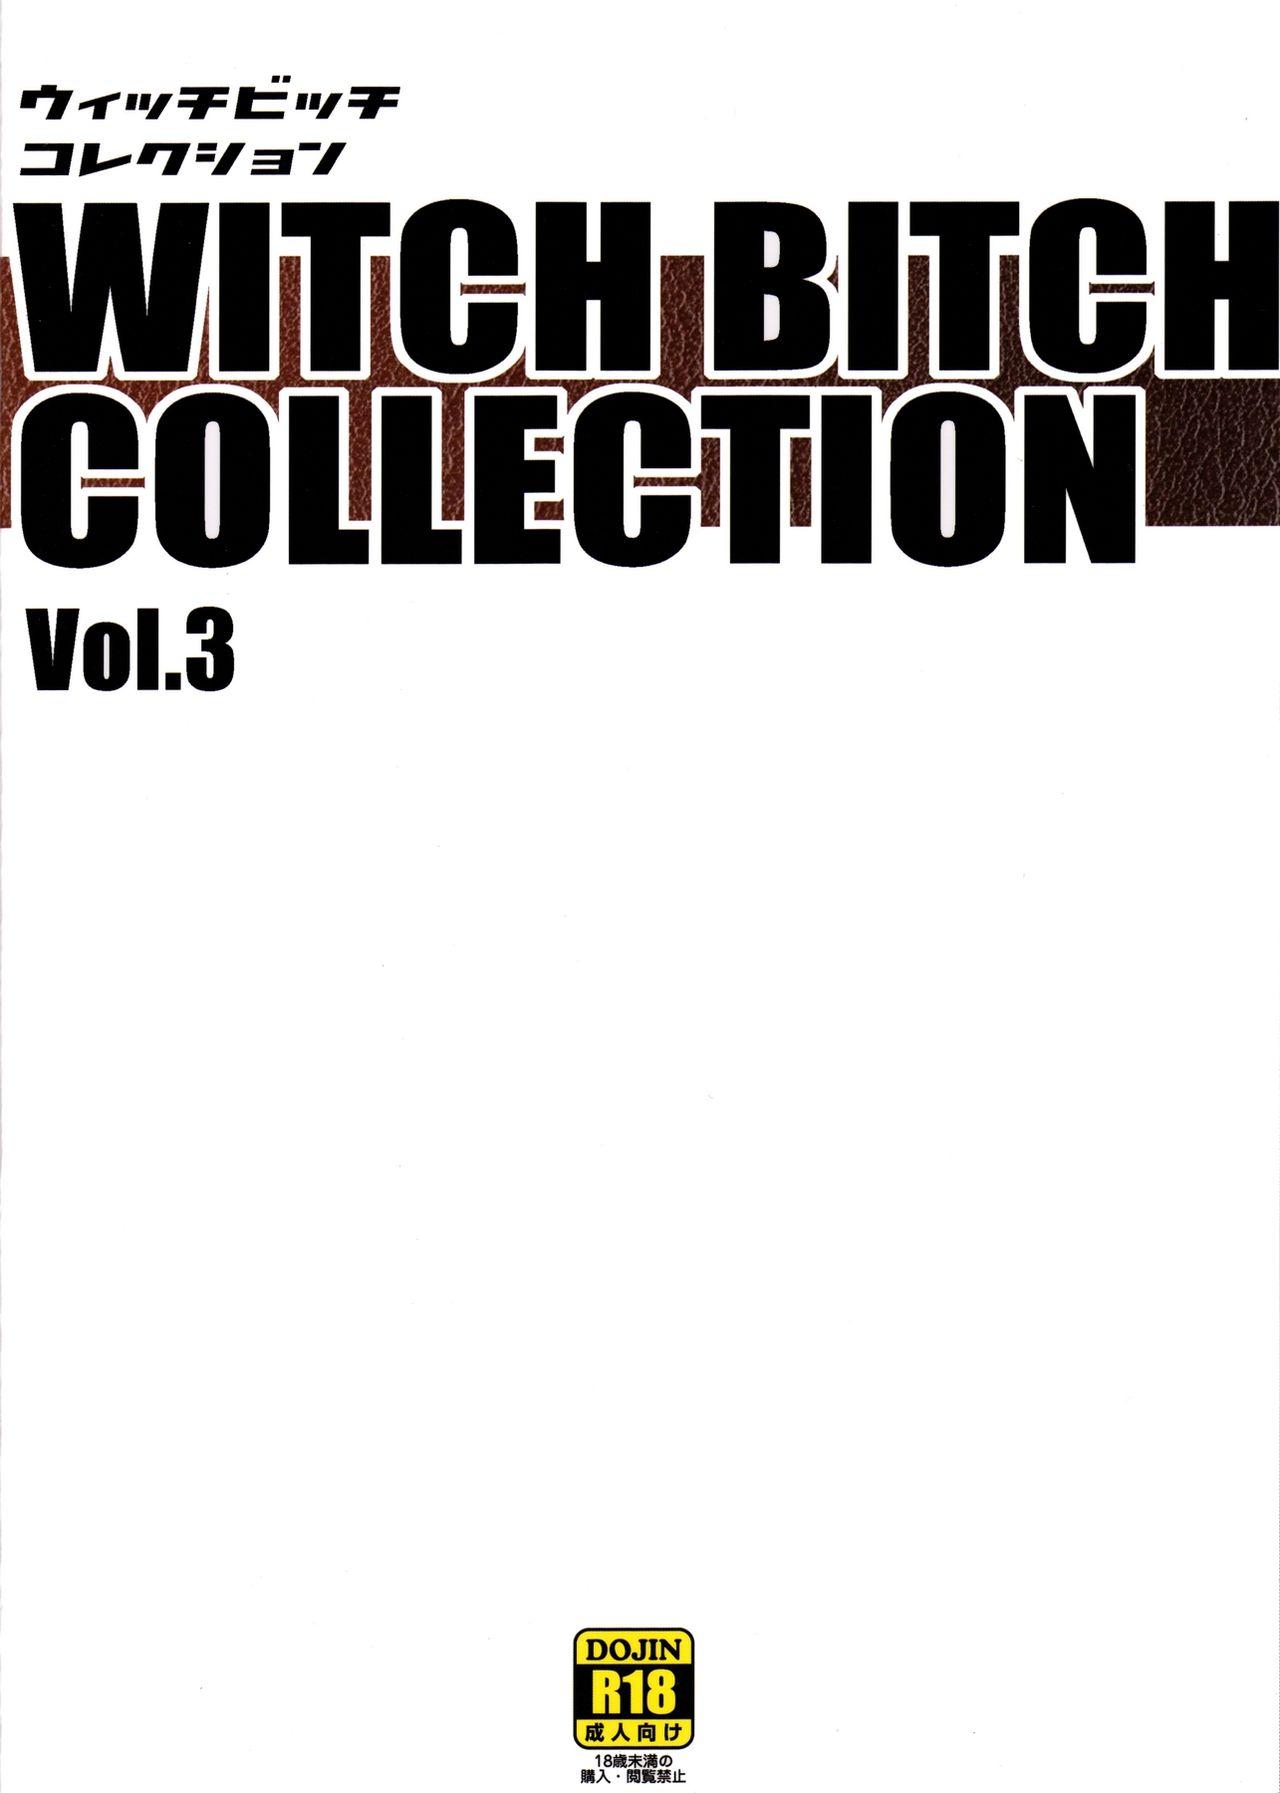 Mulher Witch Bitch Collection Vol. 3 - Fairy tail Skirt - Page 51